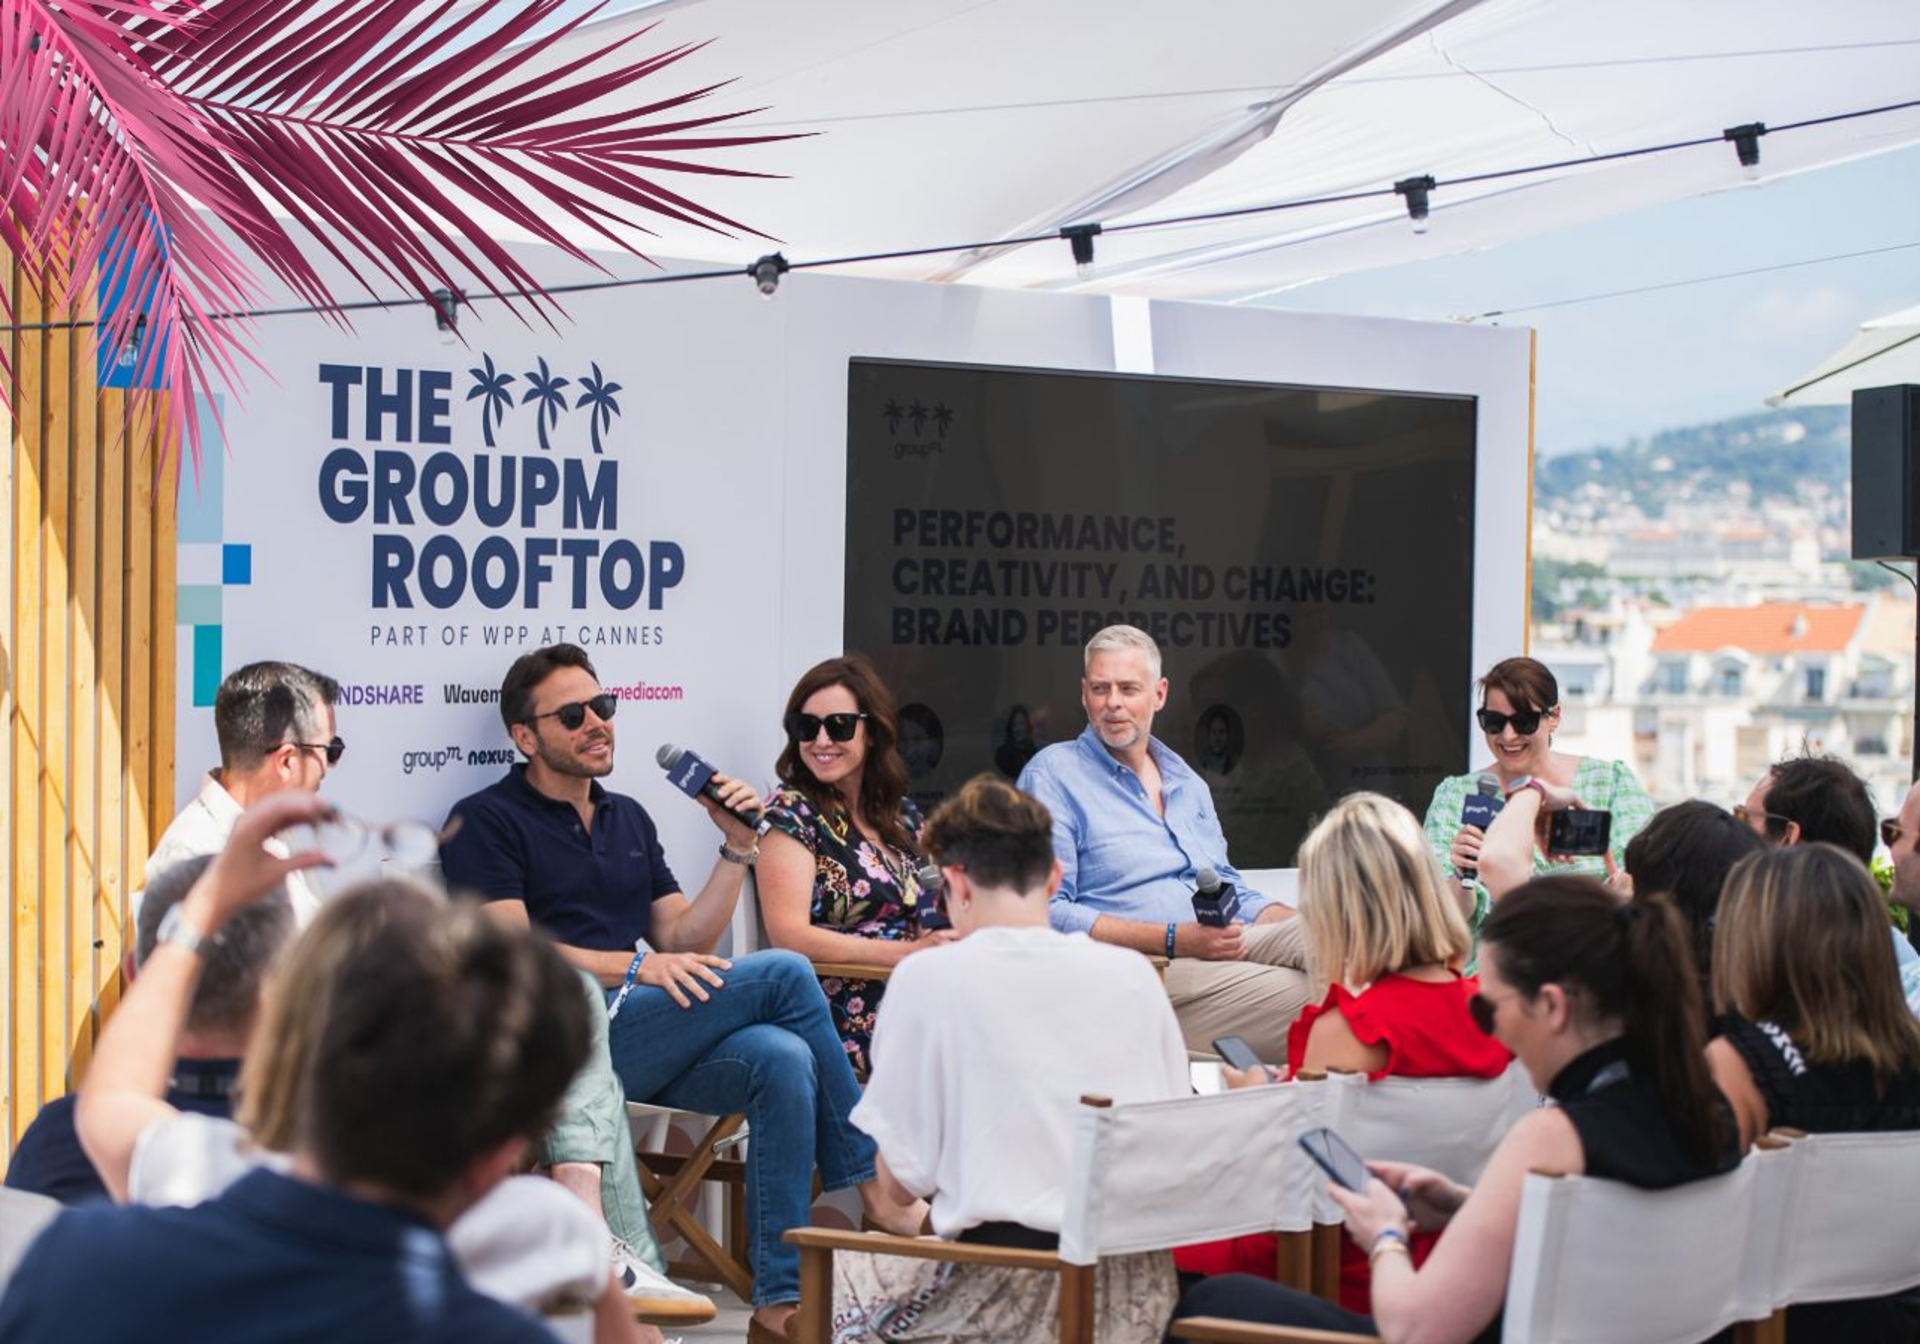 A panel for EssenceMediacom discussing brand performance and creativity at Cannes